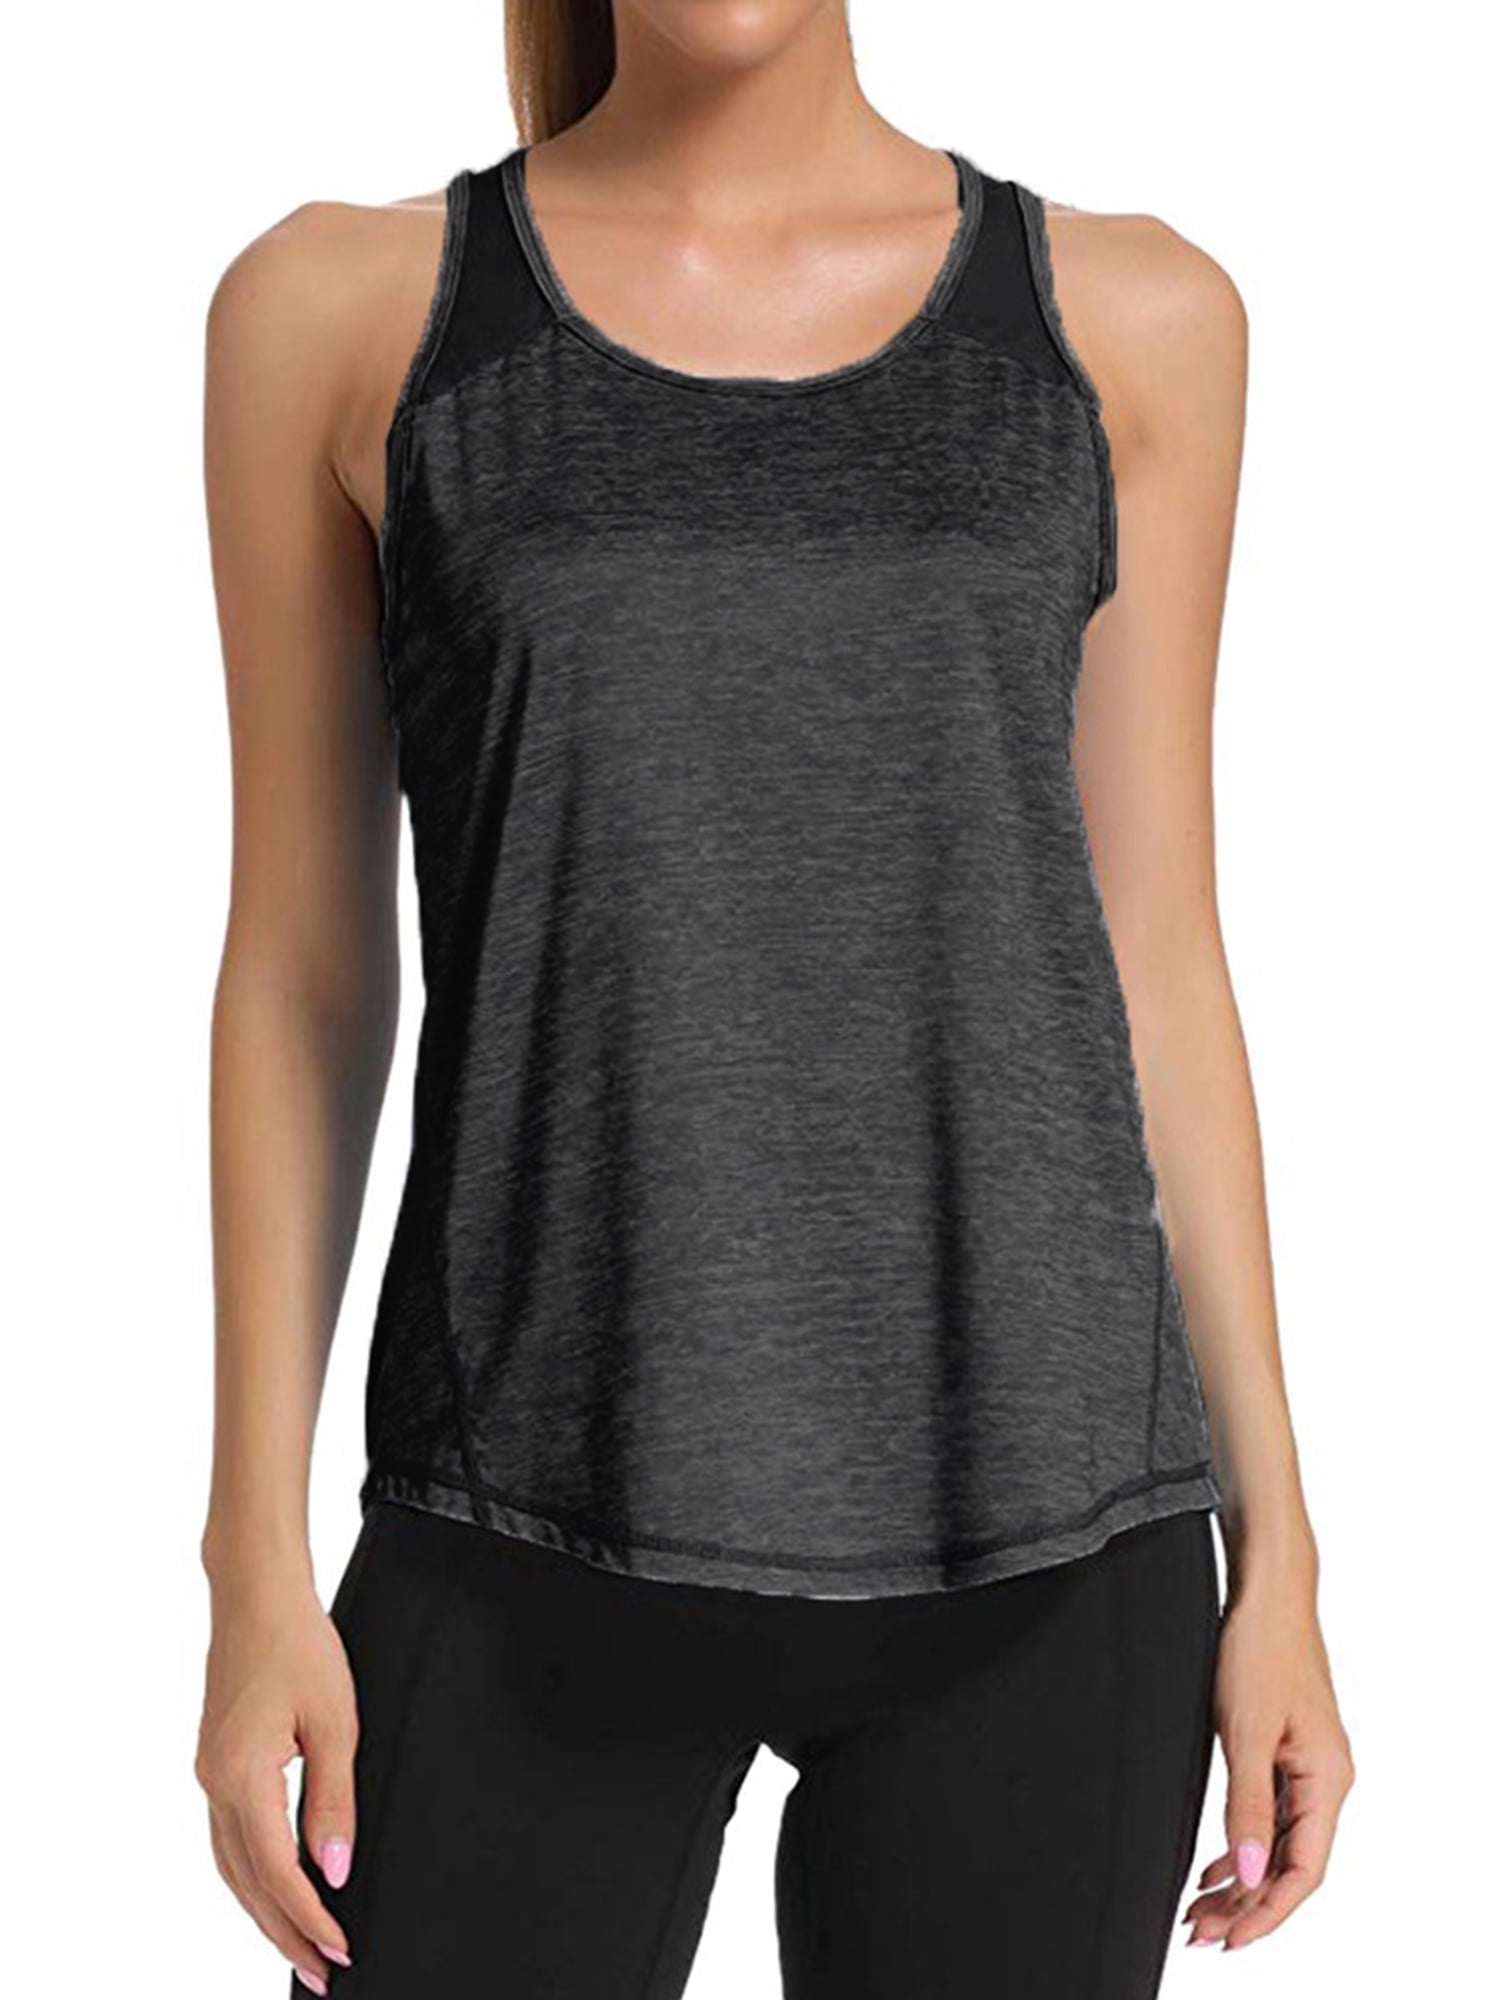 Casual Beach Tanks Loose Sports Tank Tops for Women Round Neck